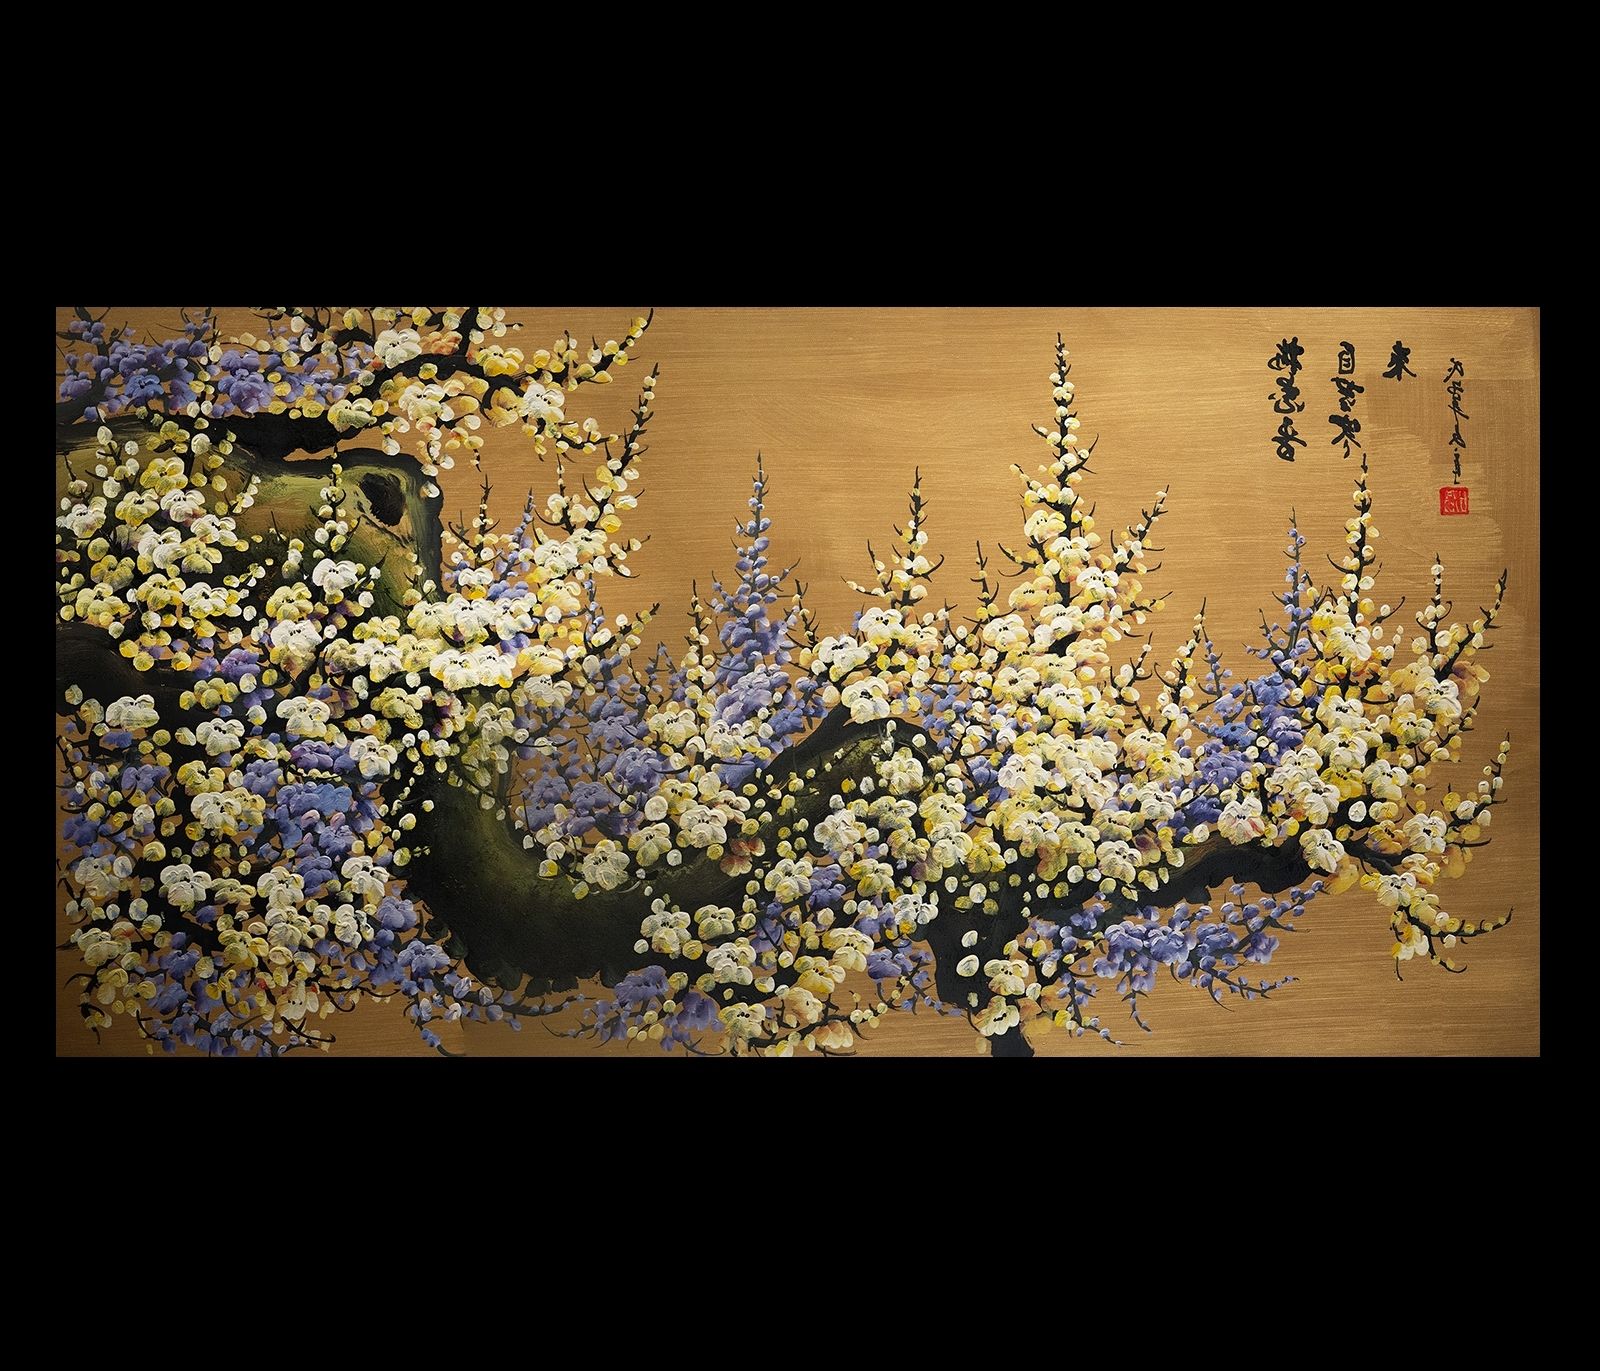 Canvas Wall Art Japanese Cherry Blossom Painting Feng Shui Regarding 2018 Japanese Wall Art Panels (View 7 of 15)